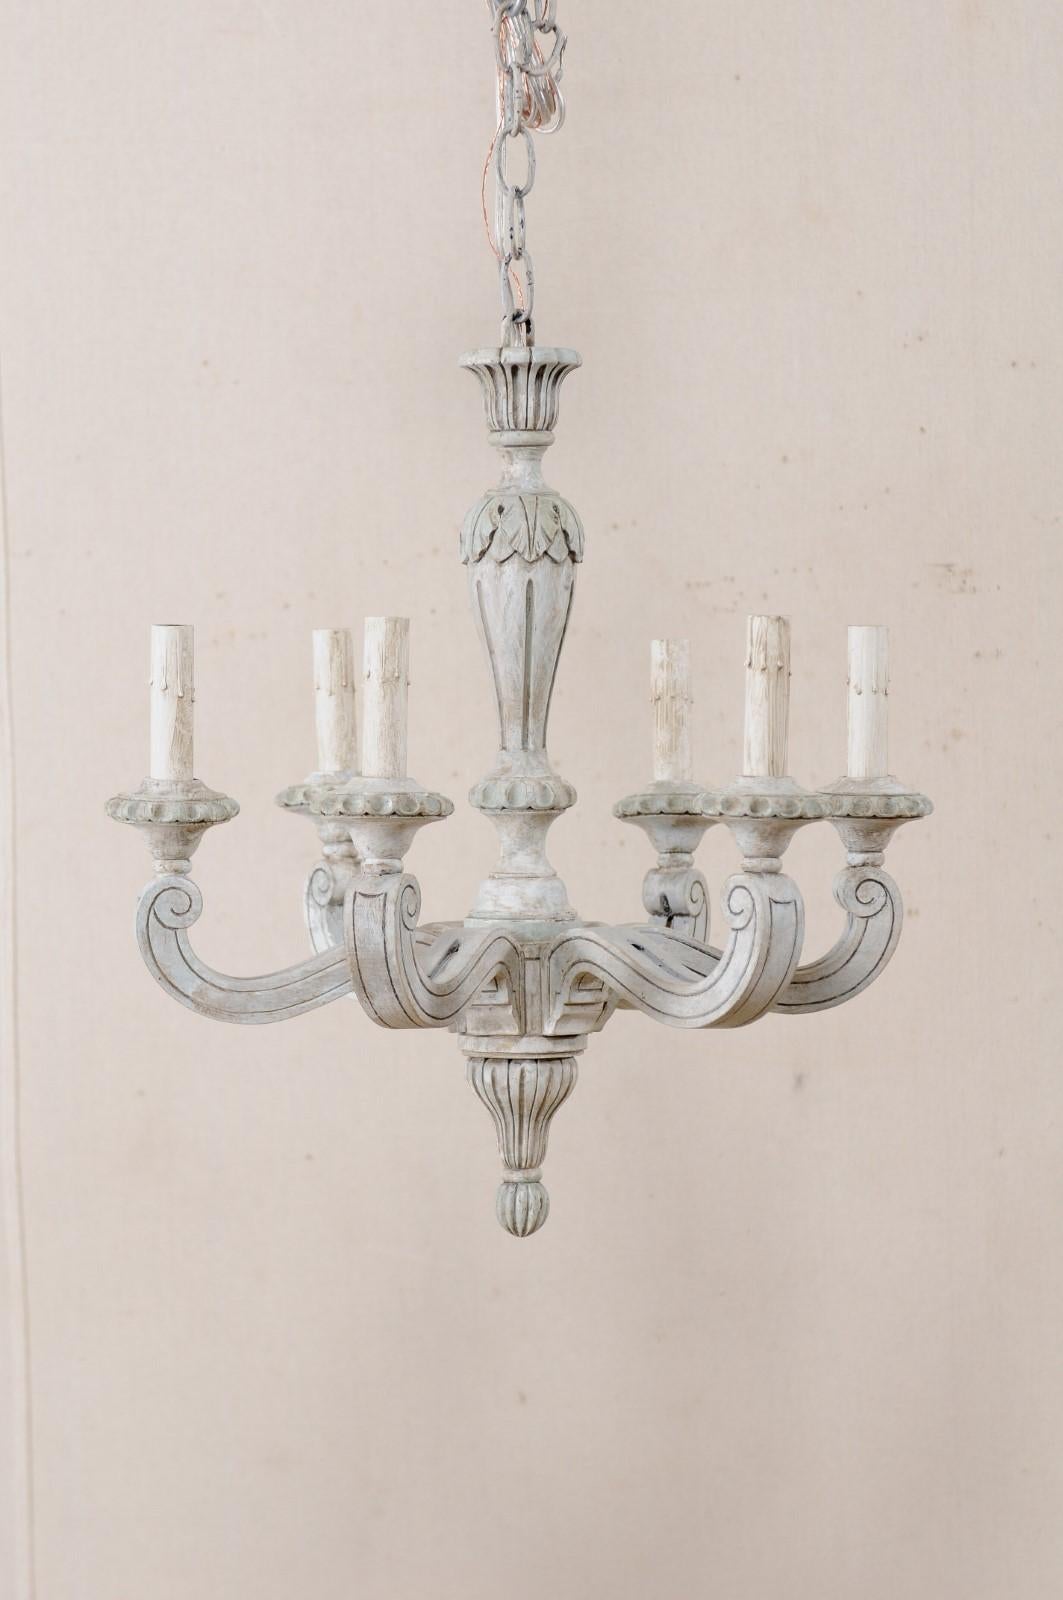 A French mid-20th century carved and painted wood six-light chandelier. This lovely mid-20th century chandelier from France features a carved central column carved with fluted accents and a leaf motif six wooden arms emerge outward and up from the